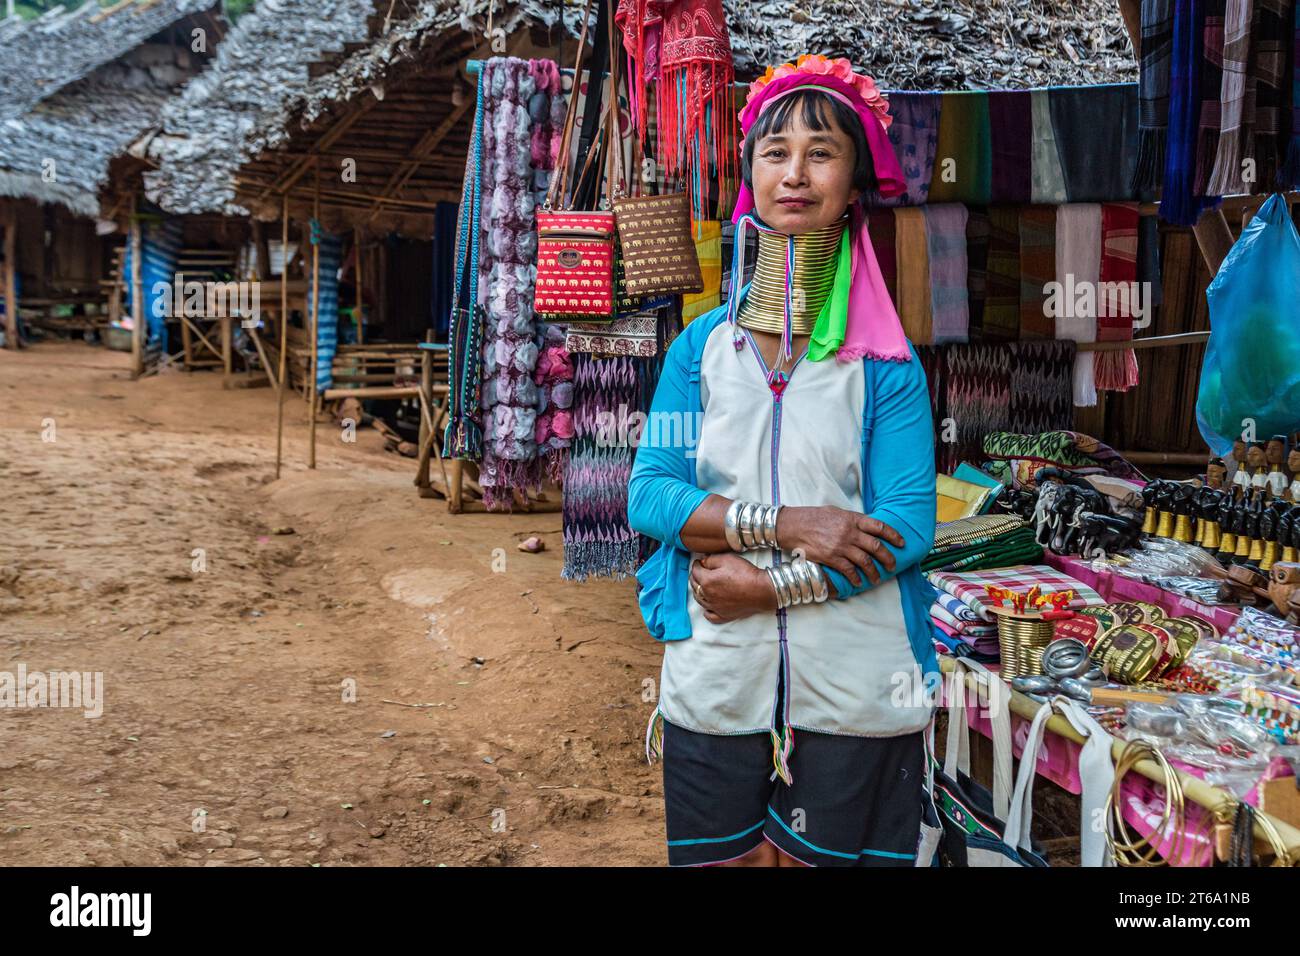 Woman selling woven scarves and other crafts in the Long Neck Karen tribe (Kayah Lahwi tribe) area of the Union of Hill tribes in Chiang Rai, Thailand Stock Photo